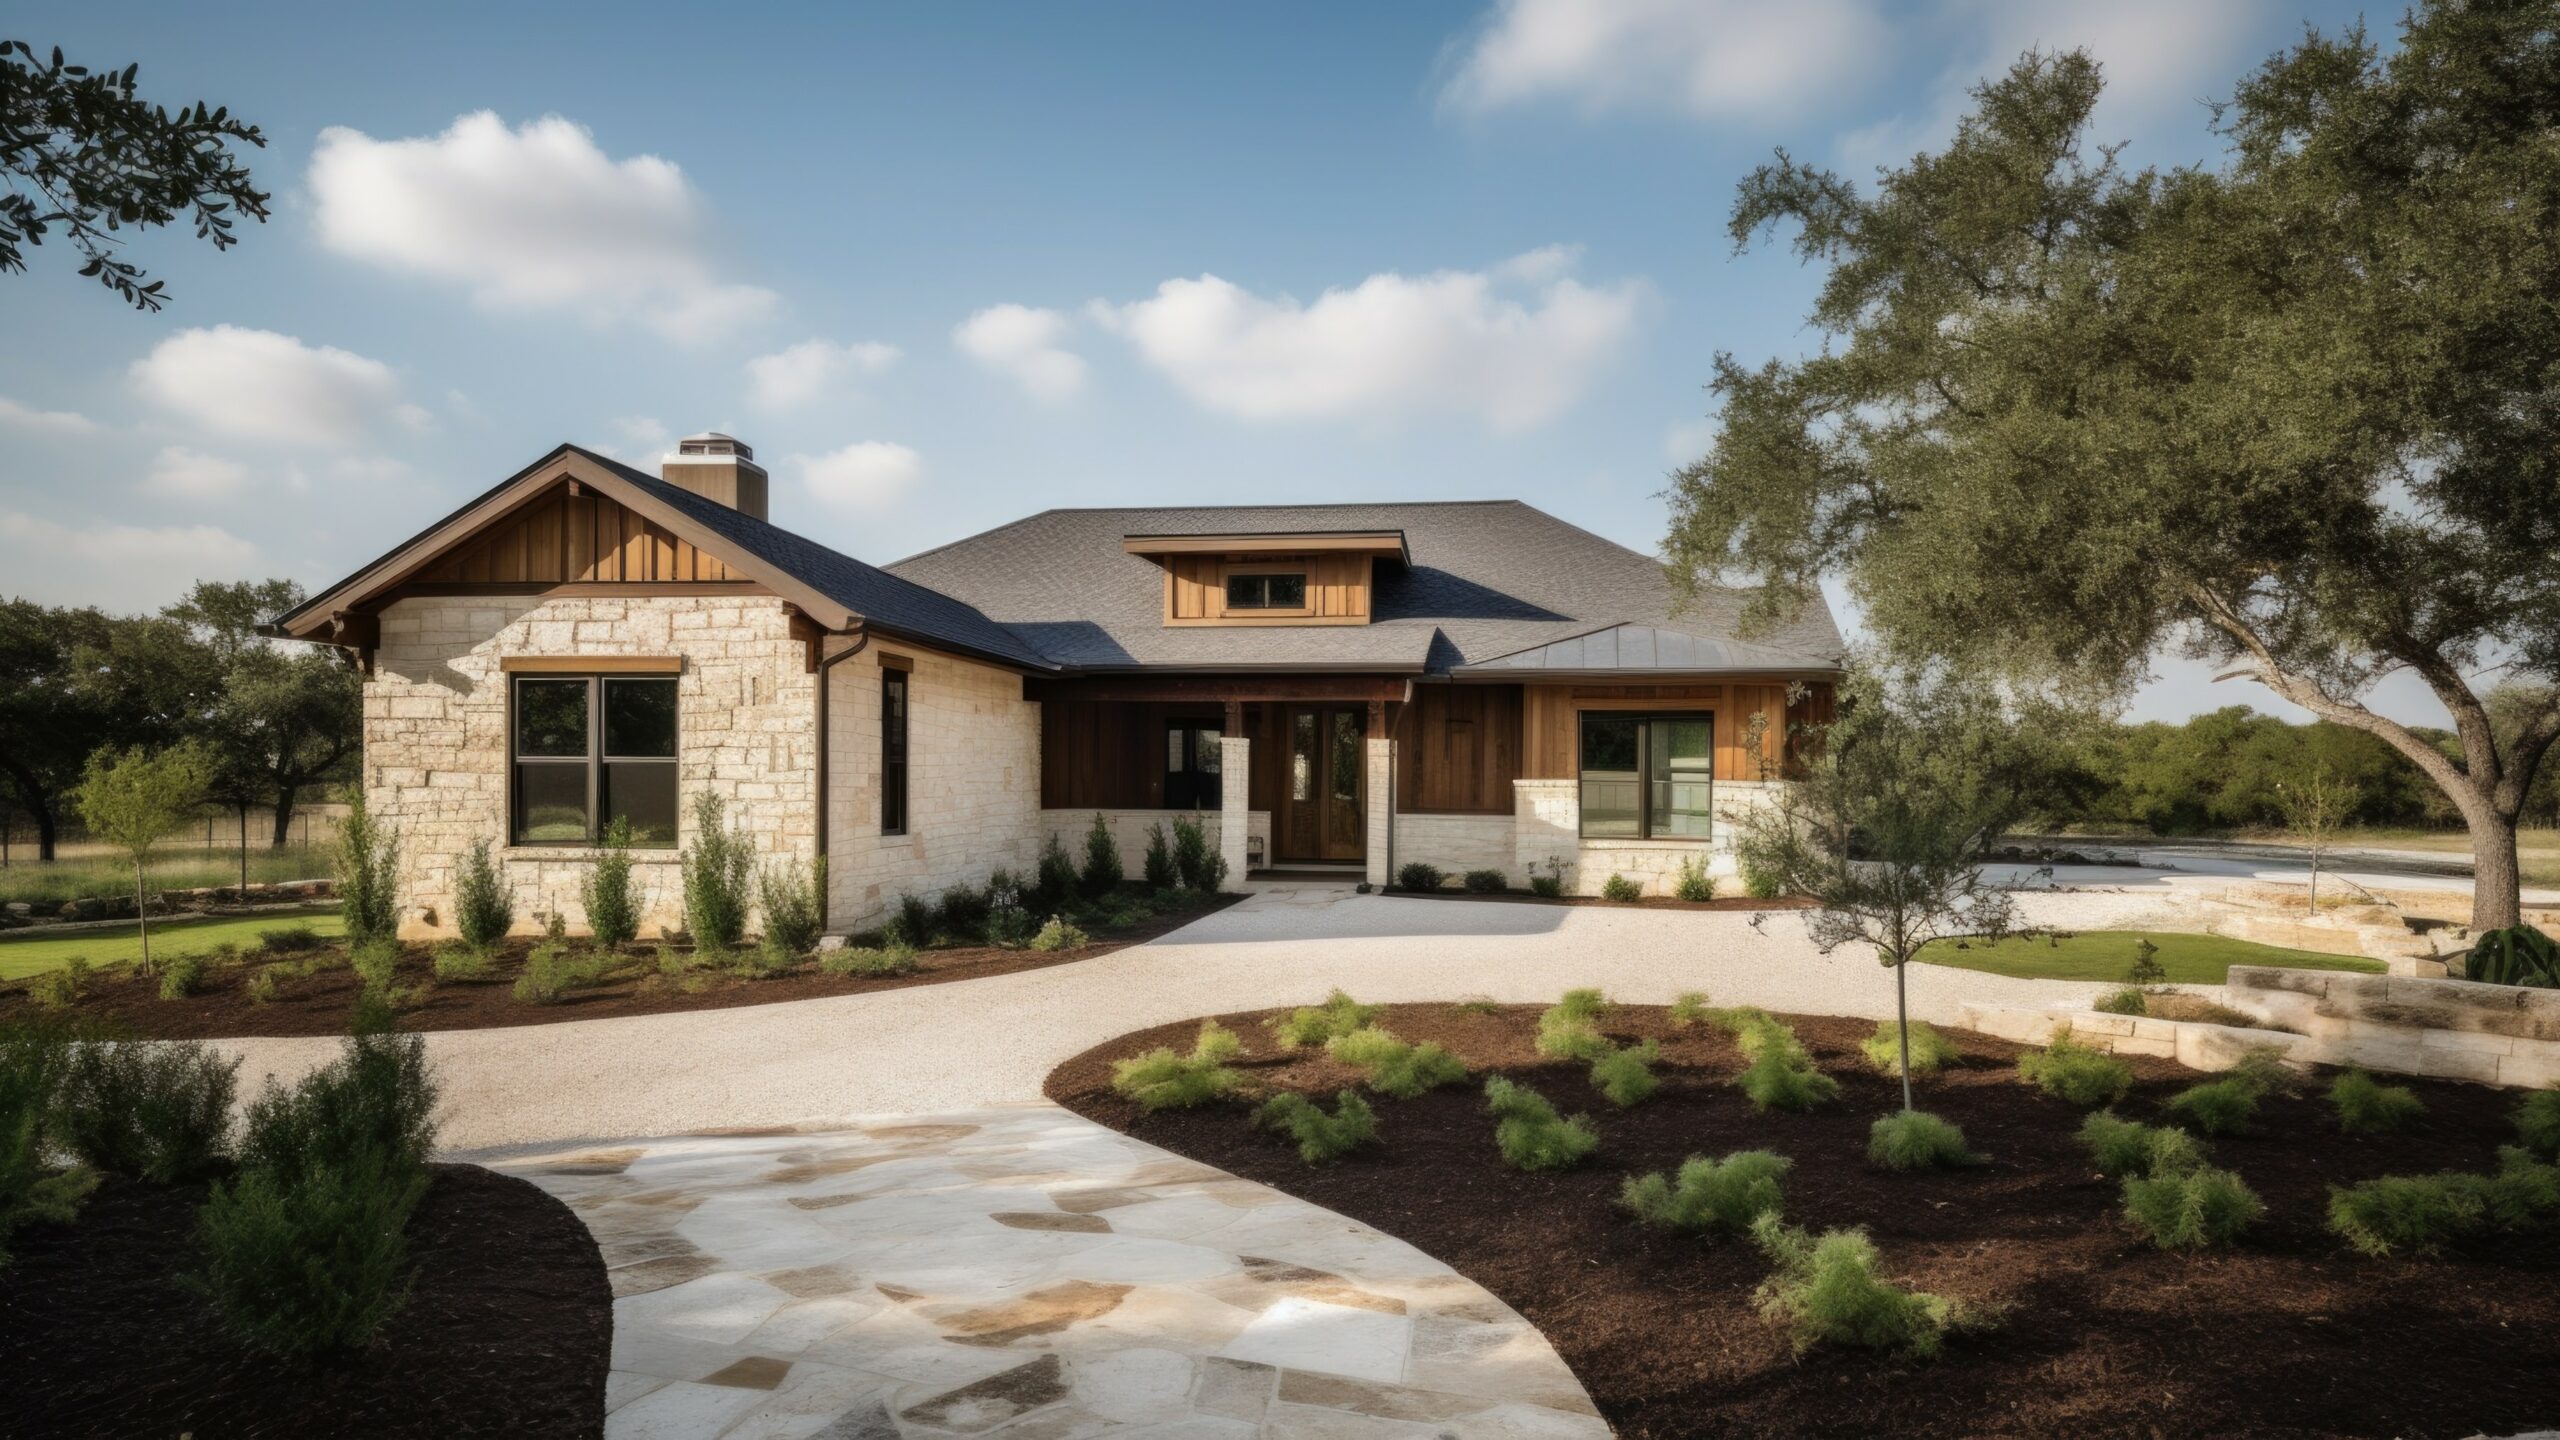 Ranch-style house with garage